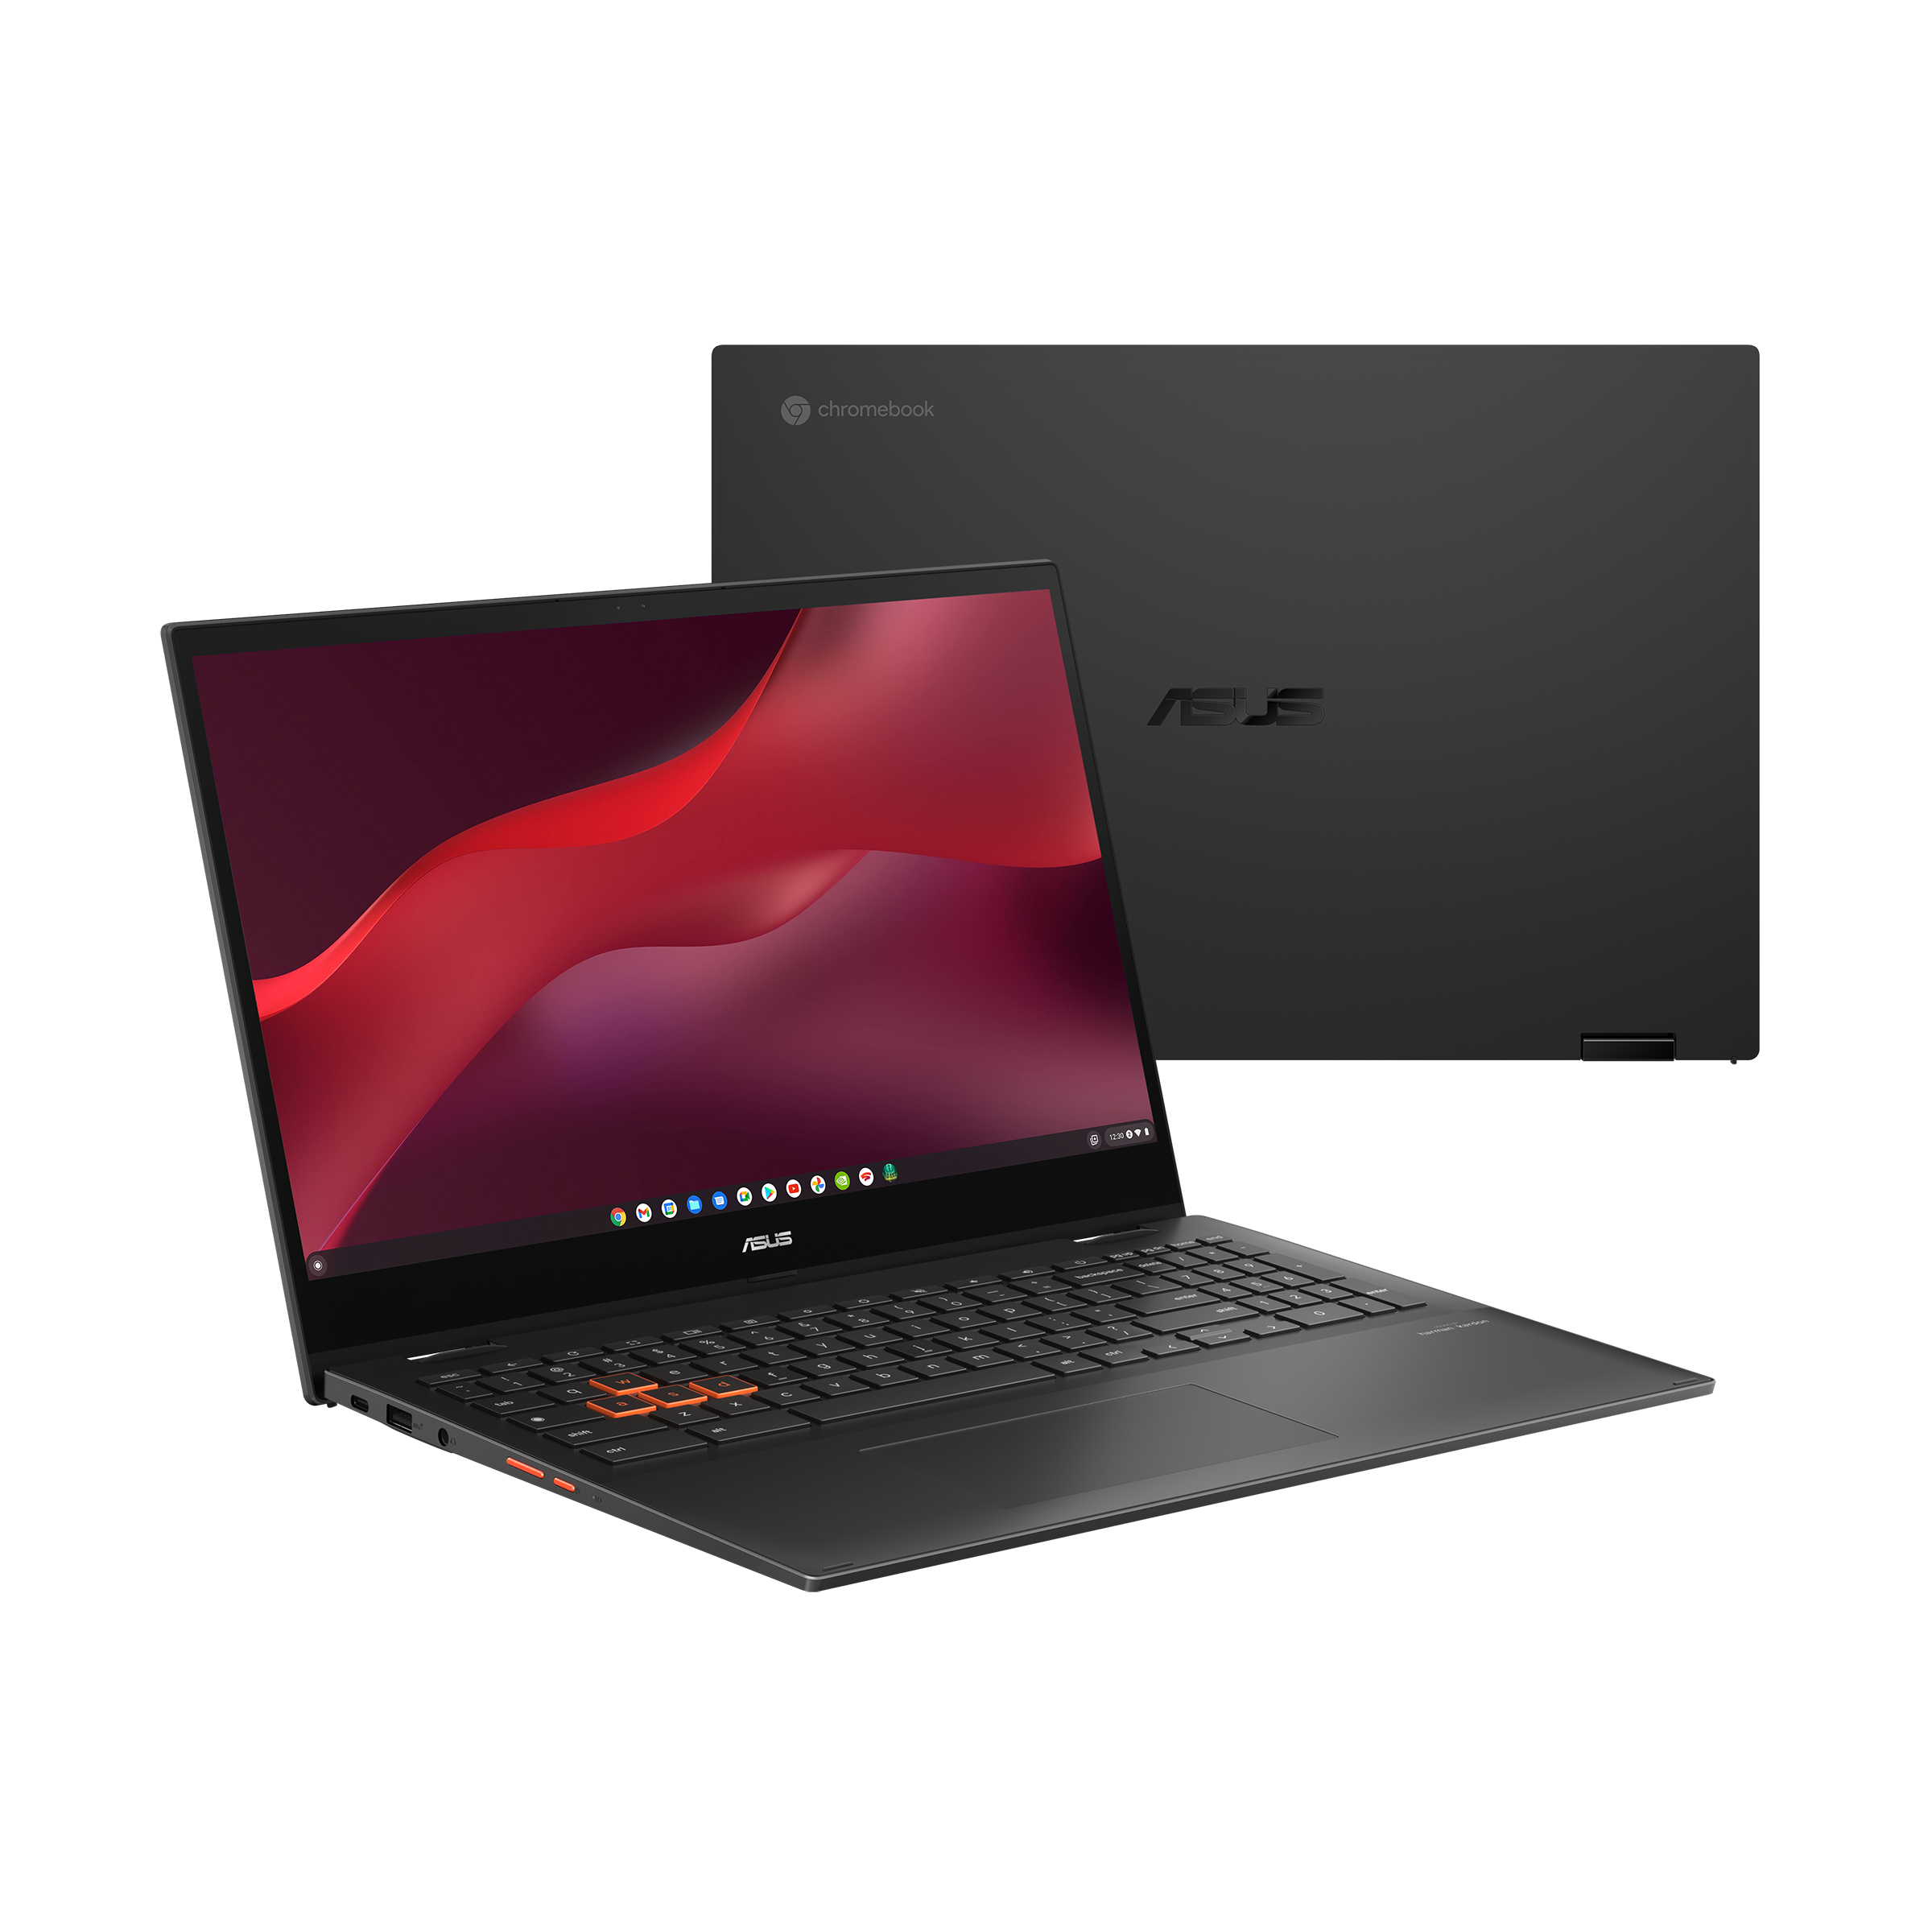 the 11.6-inch ASUS Chromebook CX1 and ASUS Chromebook Flip CX1